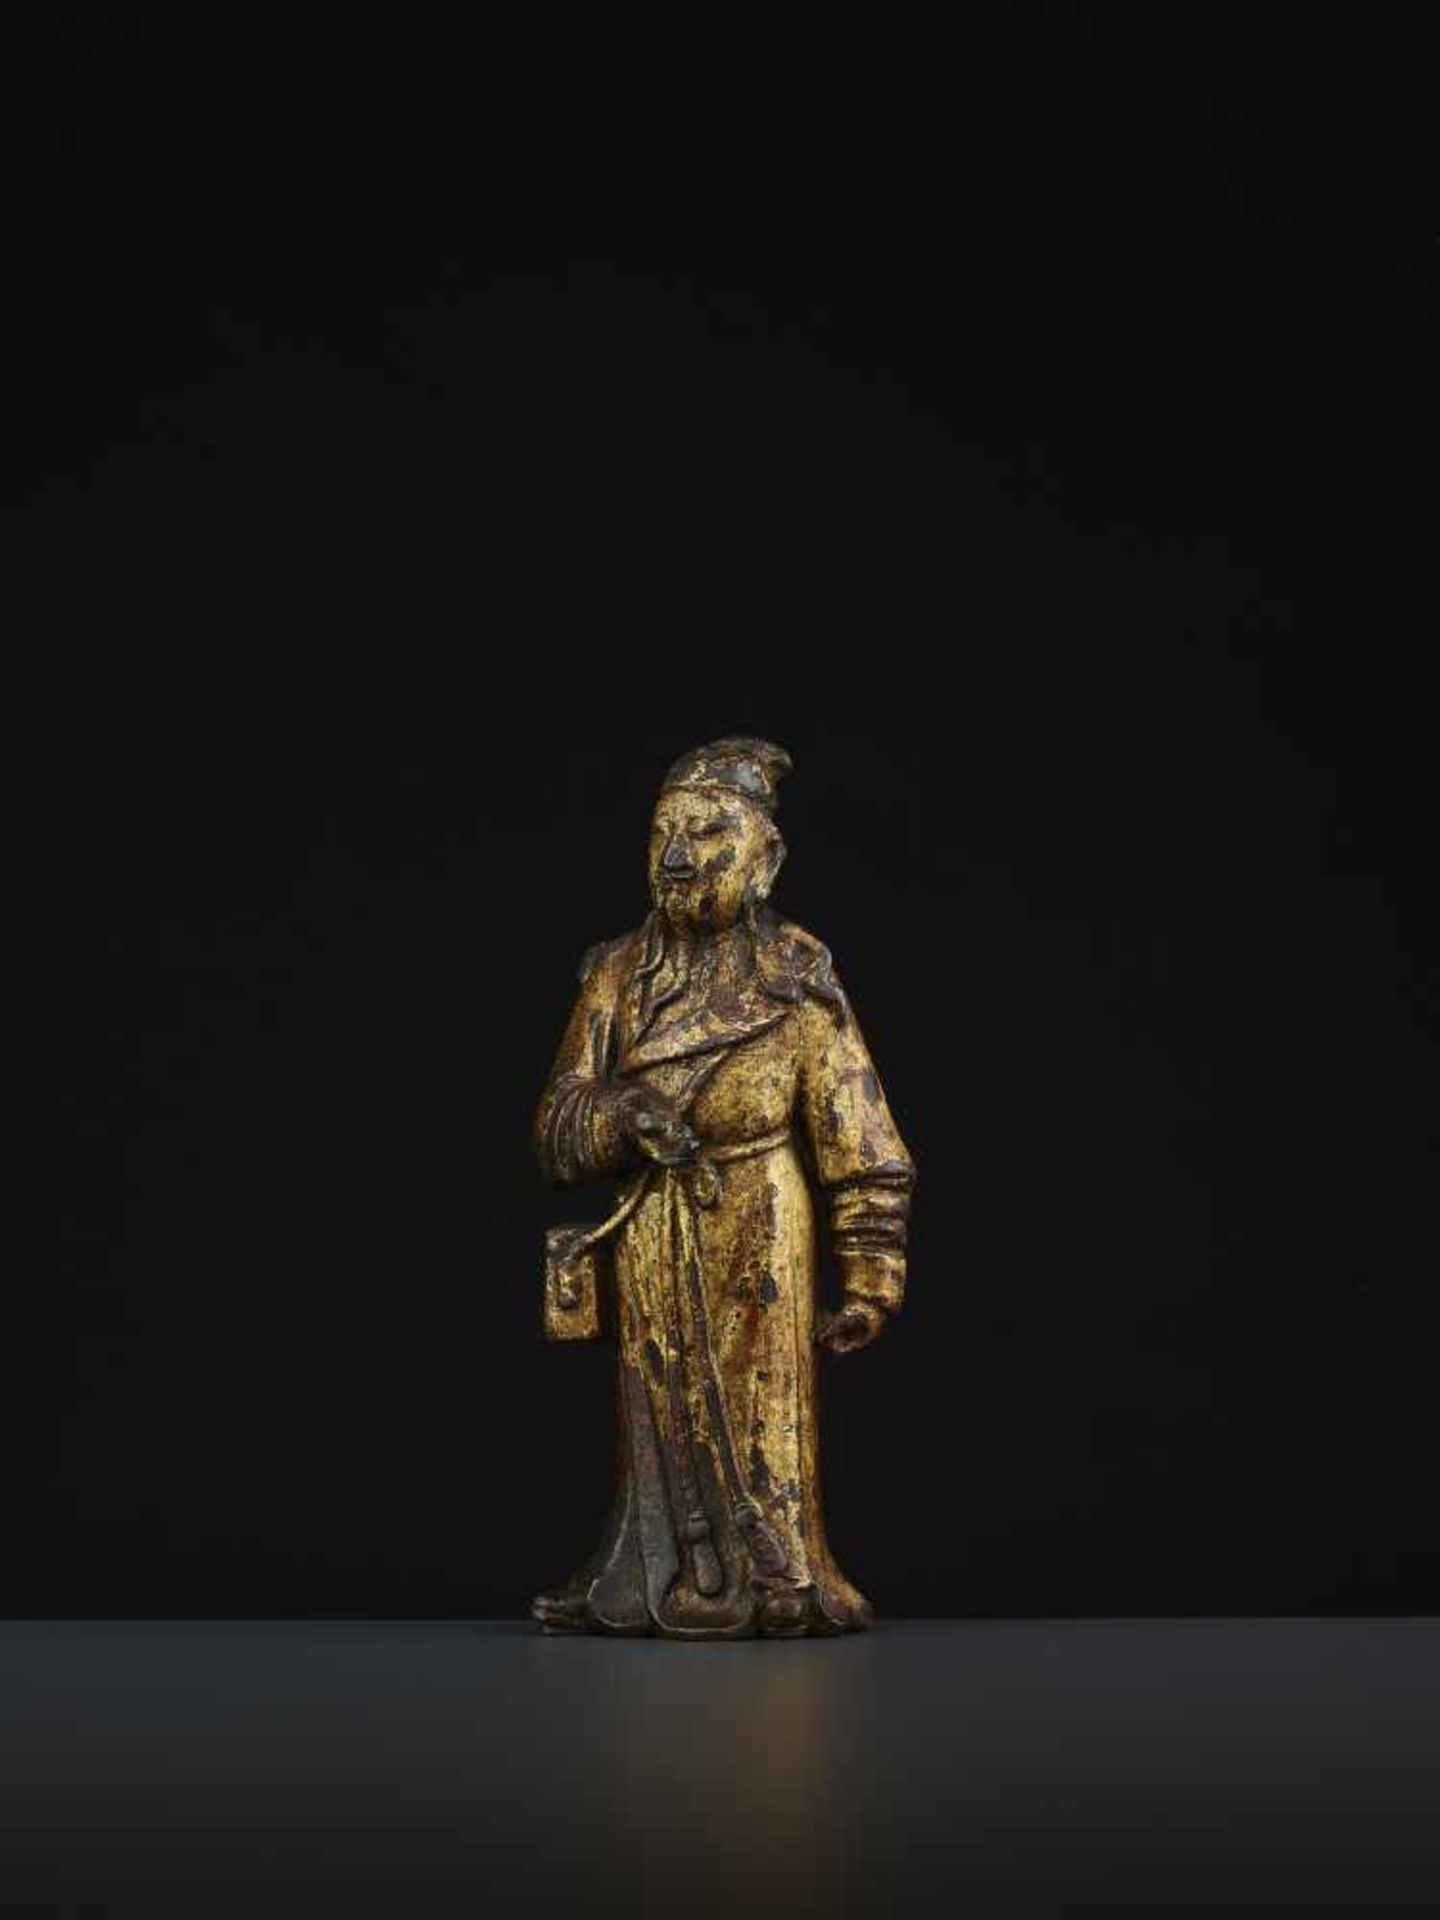 A MING DAOIST IMMORTAL BRONZEChina 16th - 17th century. The bronze with a rich gold lacquer coating. - Image 3 of 10